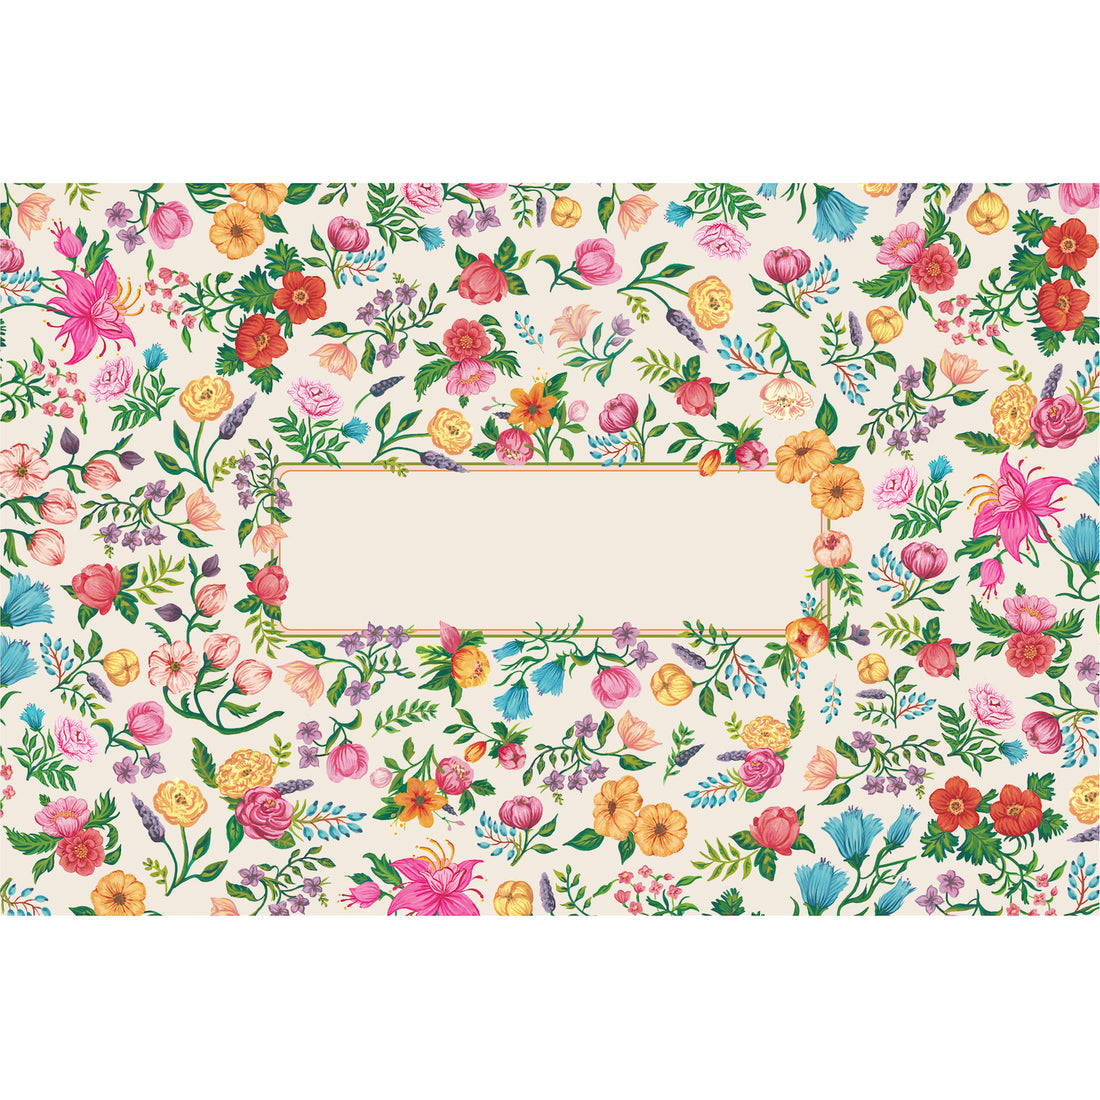 A pattern of small, illustrated pink, yellow, red and blue flowers and green leaves, scattered over a white background, with a delicately framed blank space in the center for a personal message.